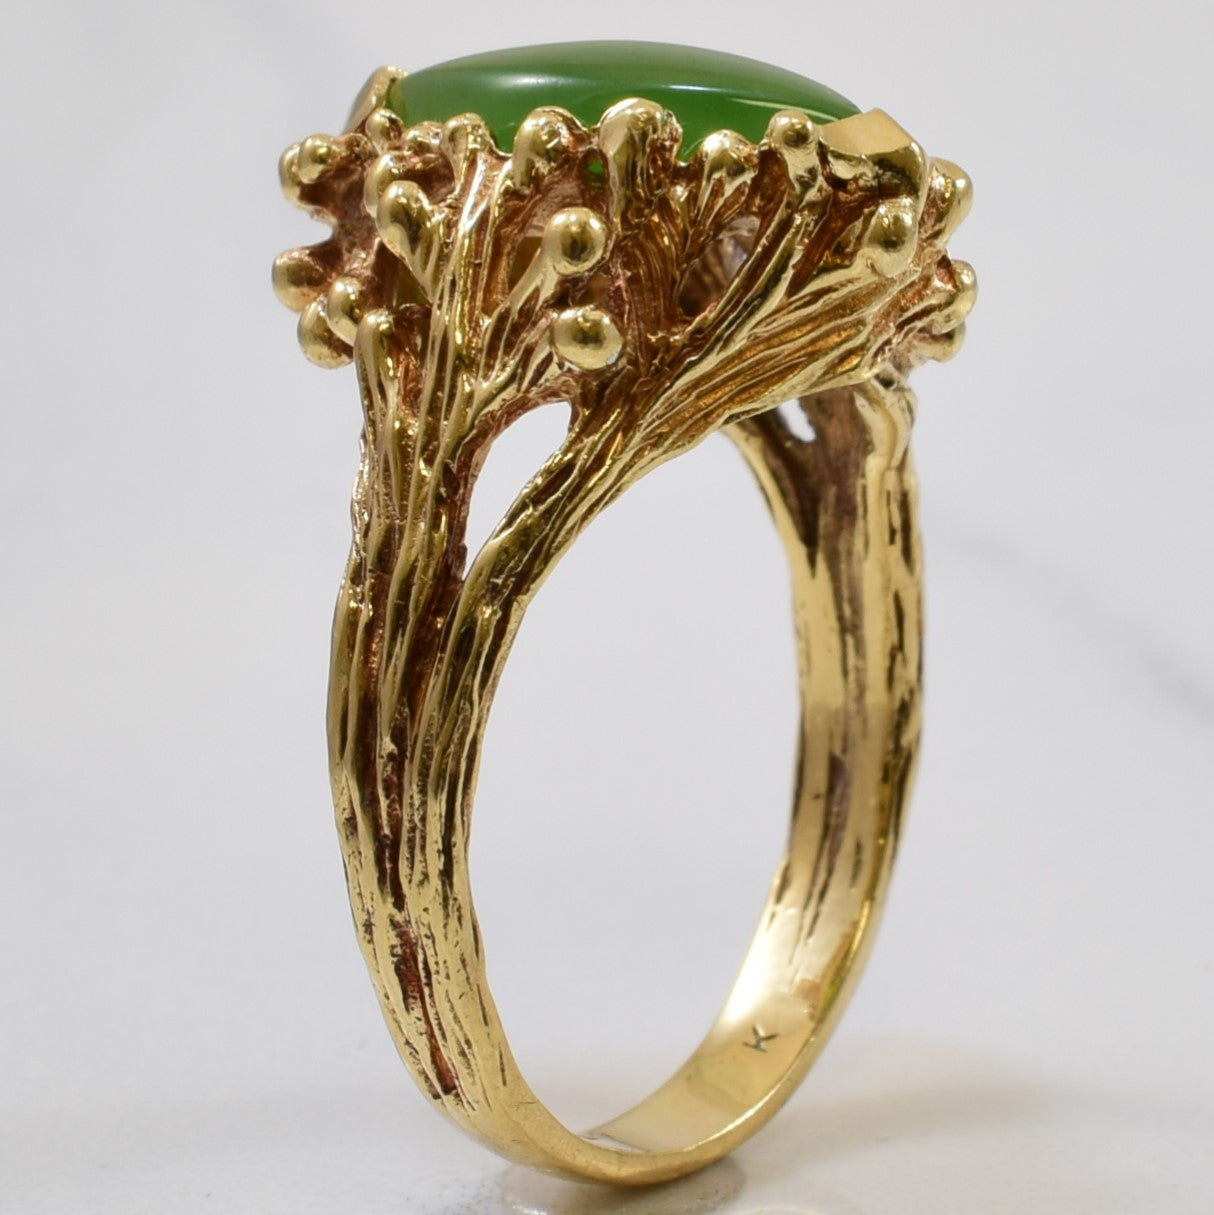 Marquise Cut Nephrite Jade Cocktail Ring | 1.60ct | SZ 7.25 |